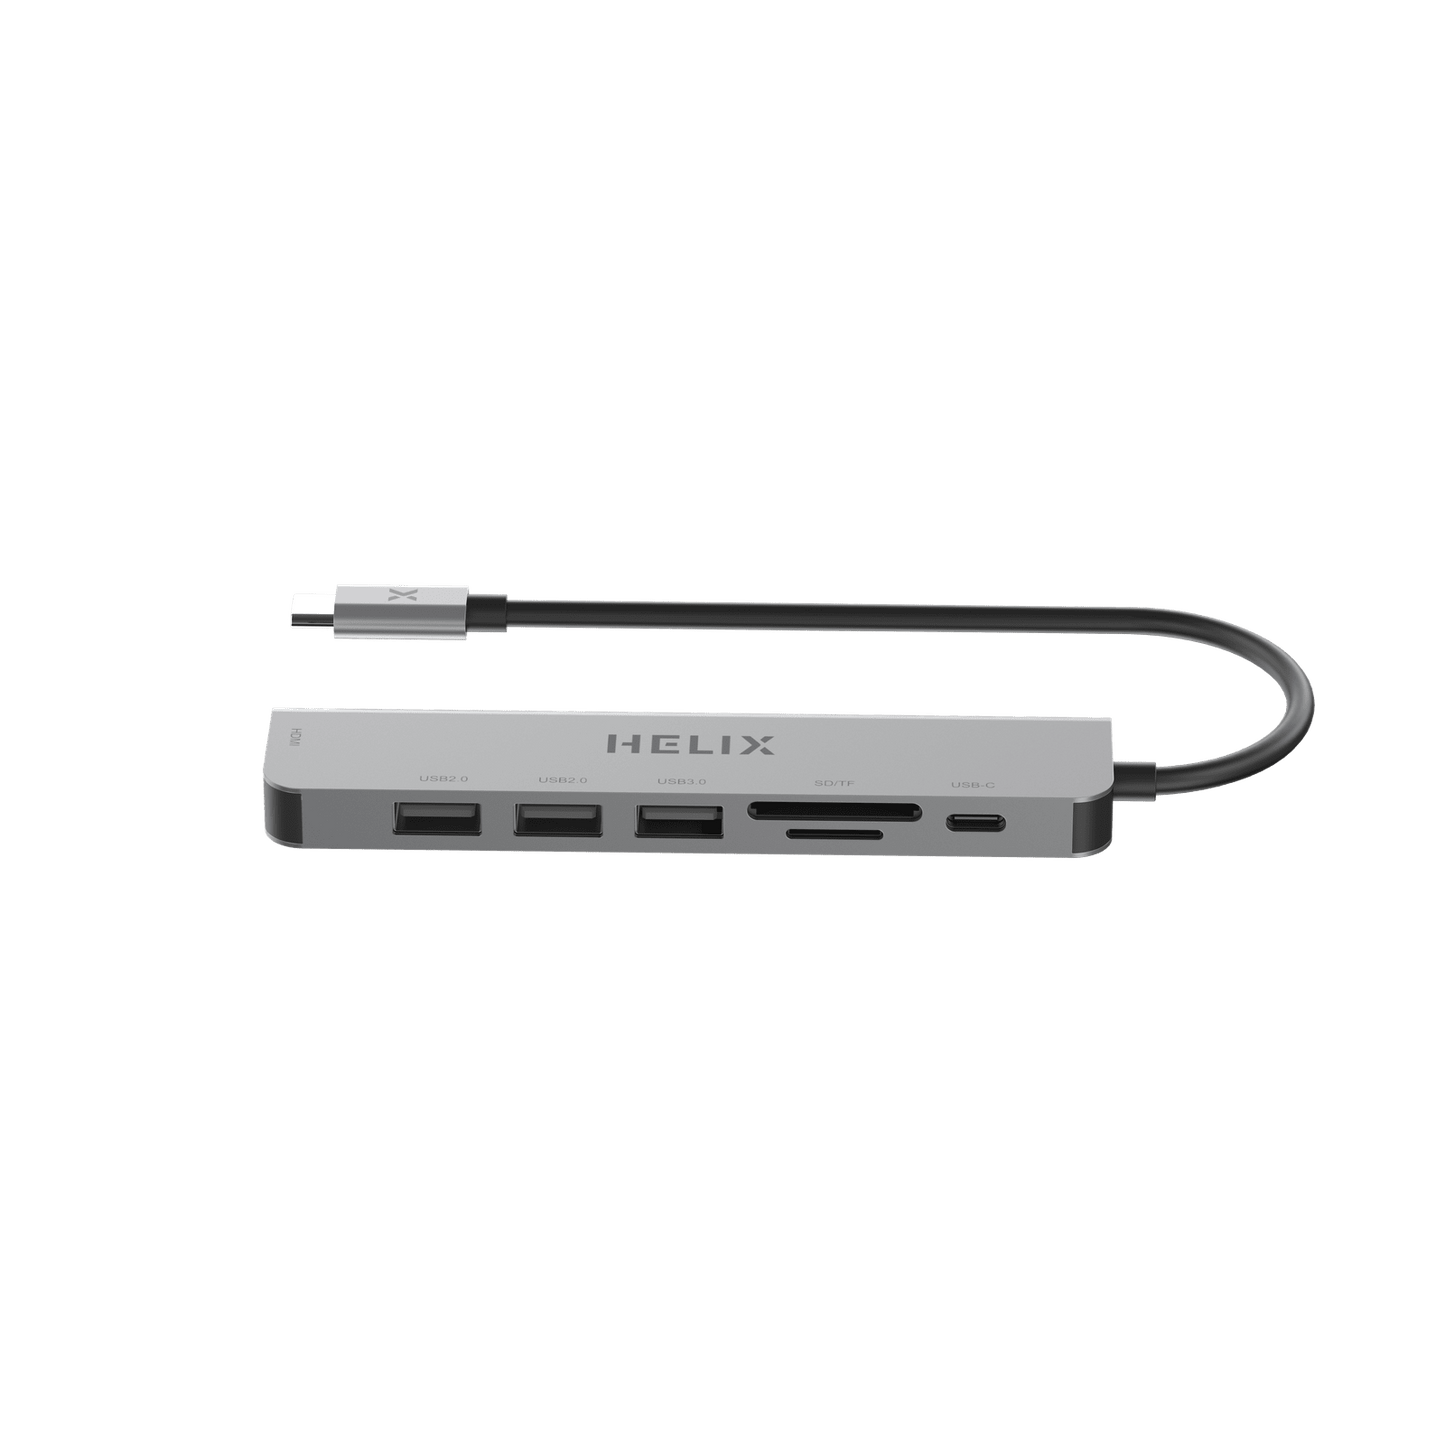 HELIX 7-IN-1 100W PD USB-C HUB With USB 3.0, 4K HDMI, Aluminum ProtectHELIX 7-IN-1 100W PD USB-C HUB With USB 3.0, 4K HDMI, Aluminum Protective Shell - HELIHUB-7 - Comprehensive Connectivity:A versatile hub offering seven ports for enhUSB HUBHELIXHELIX